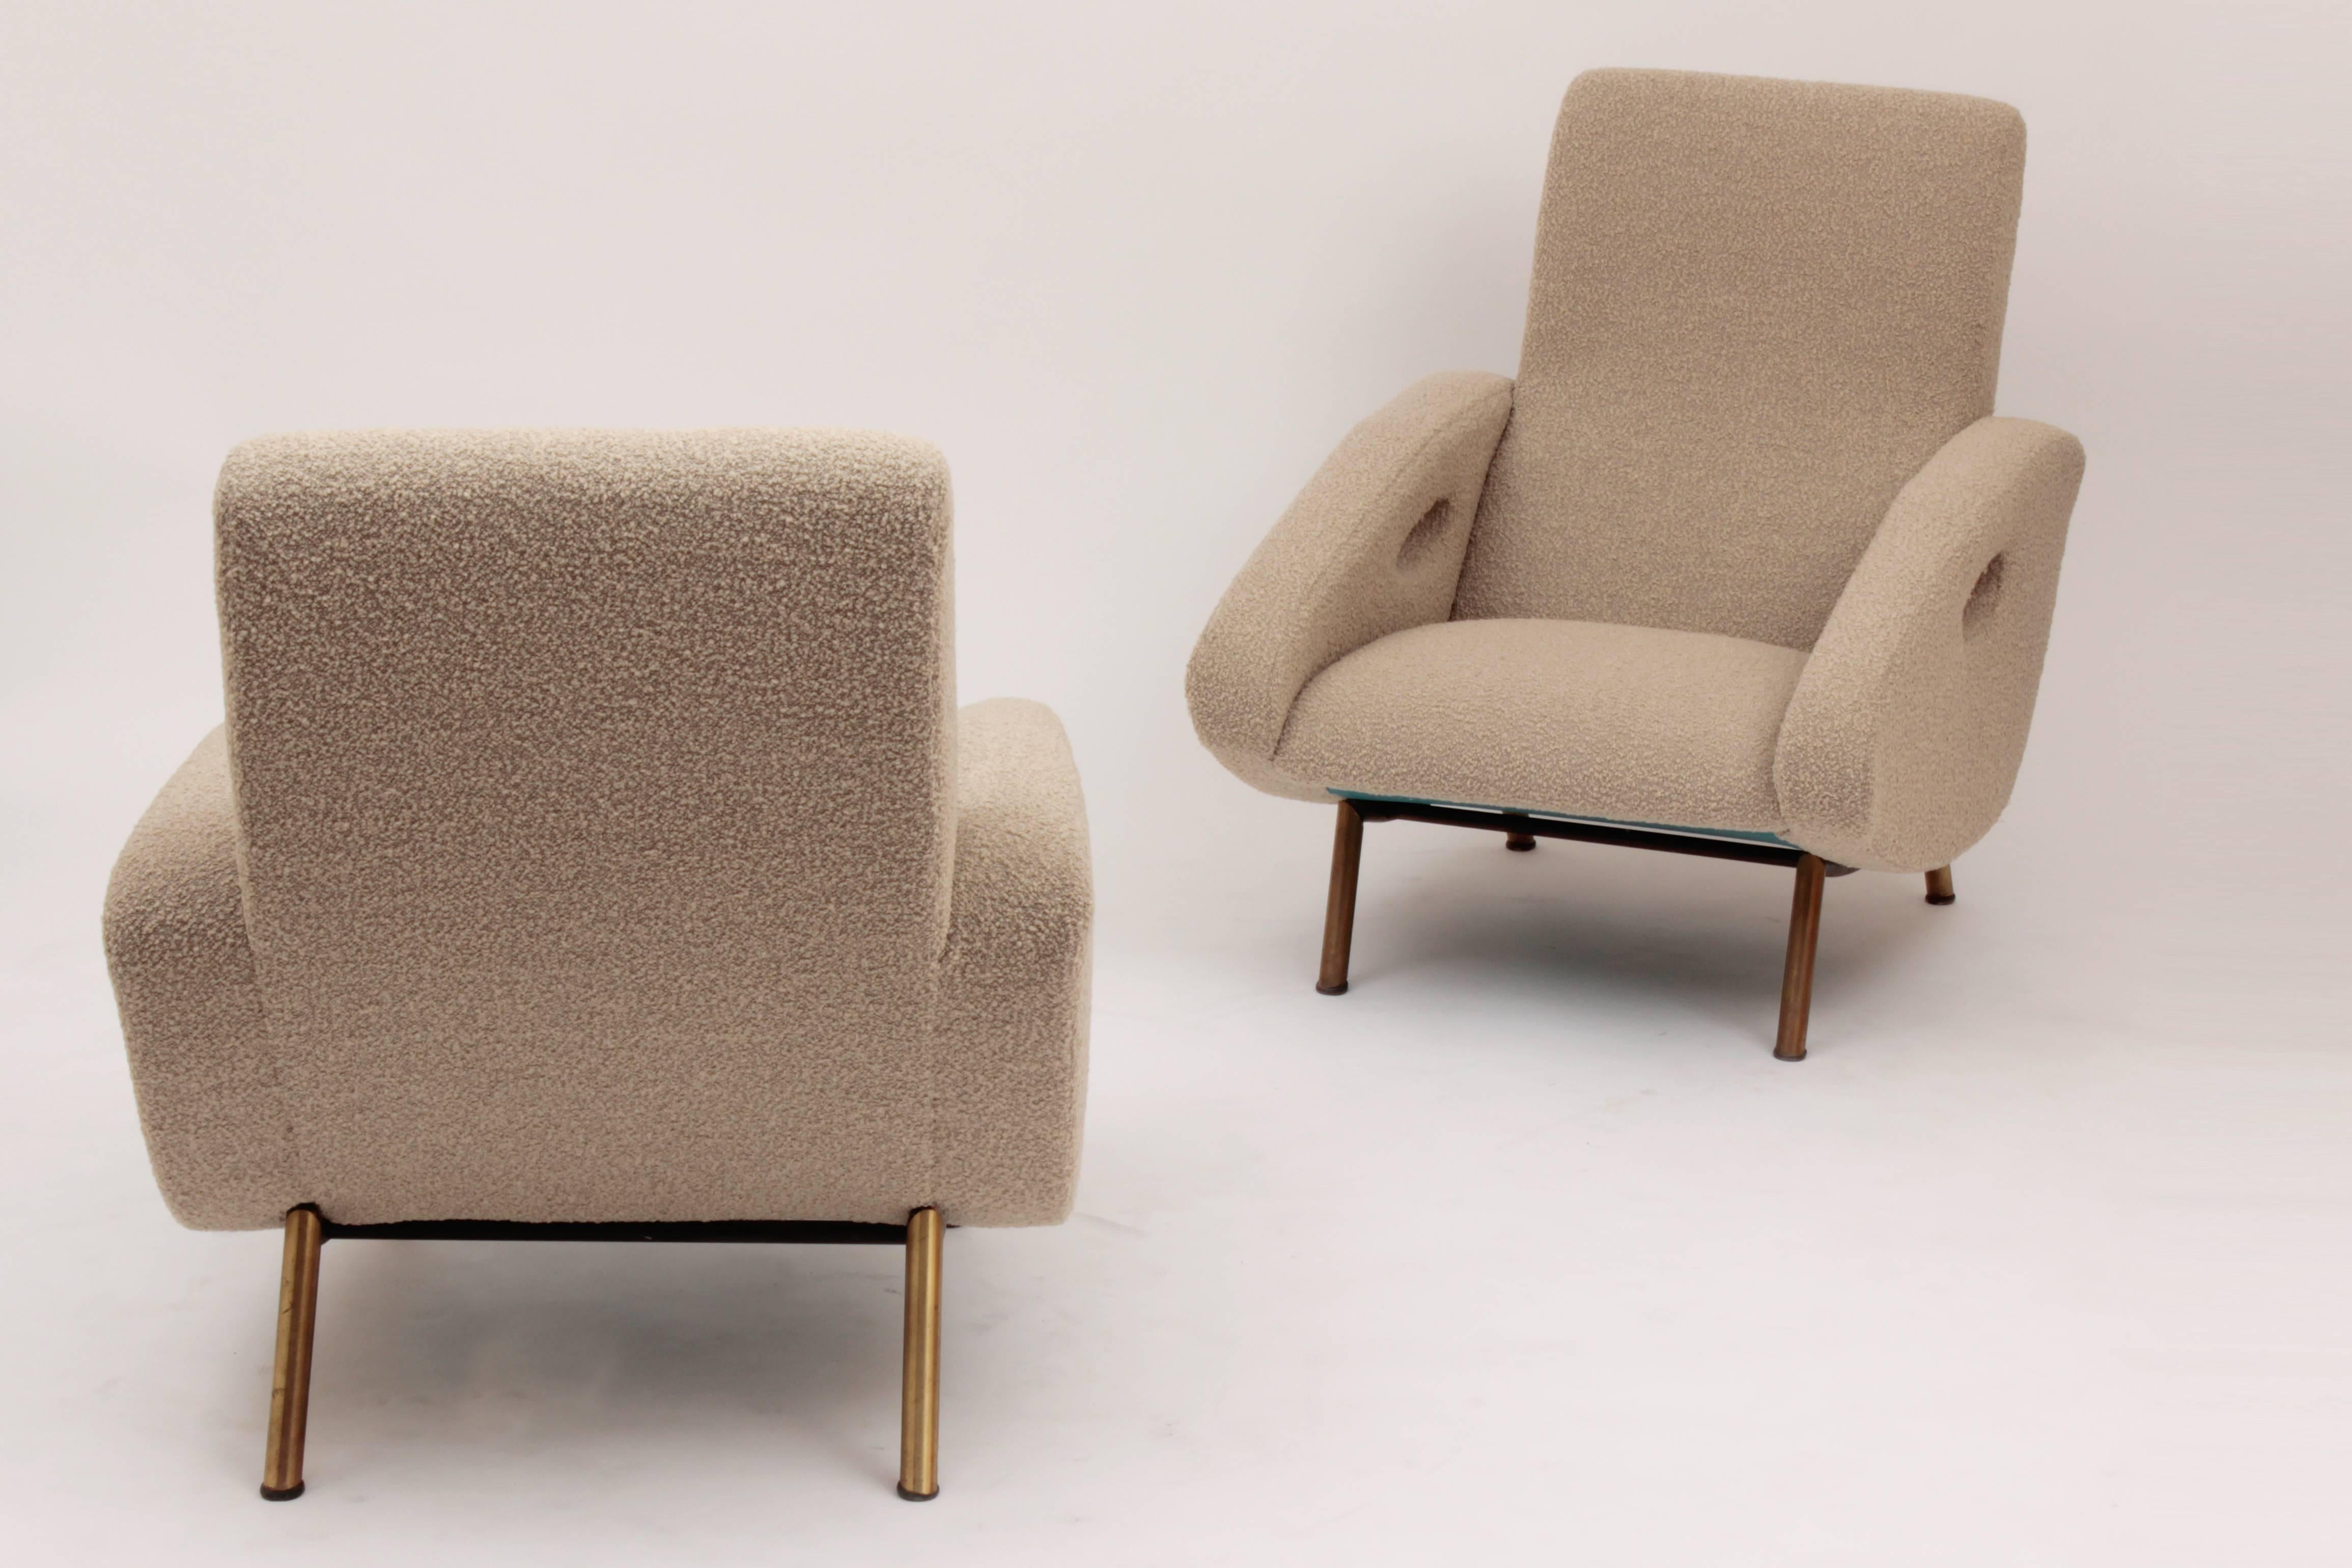 Mid-Century Modern Pair of Armchairs by François Letourneur for Maurice Mourra, France, circa 1955